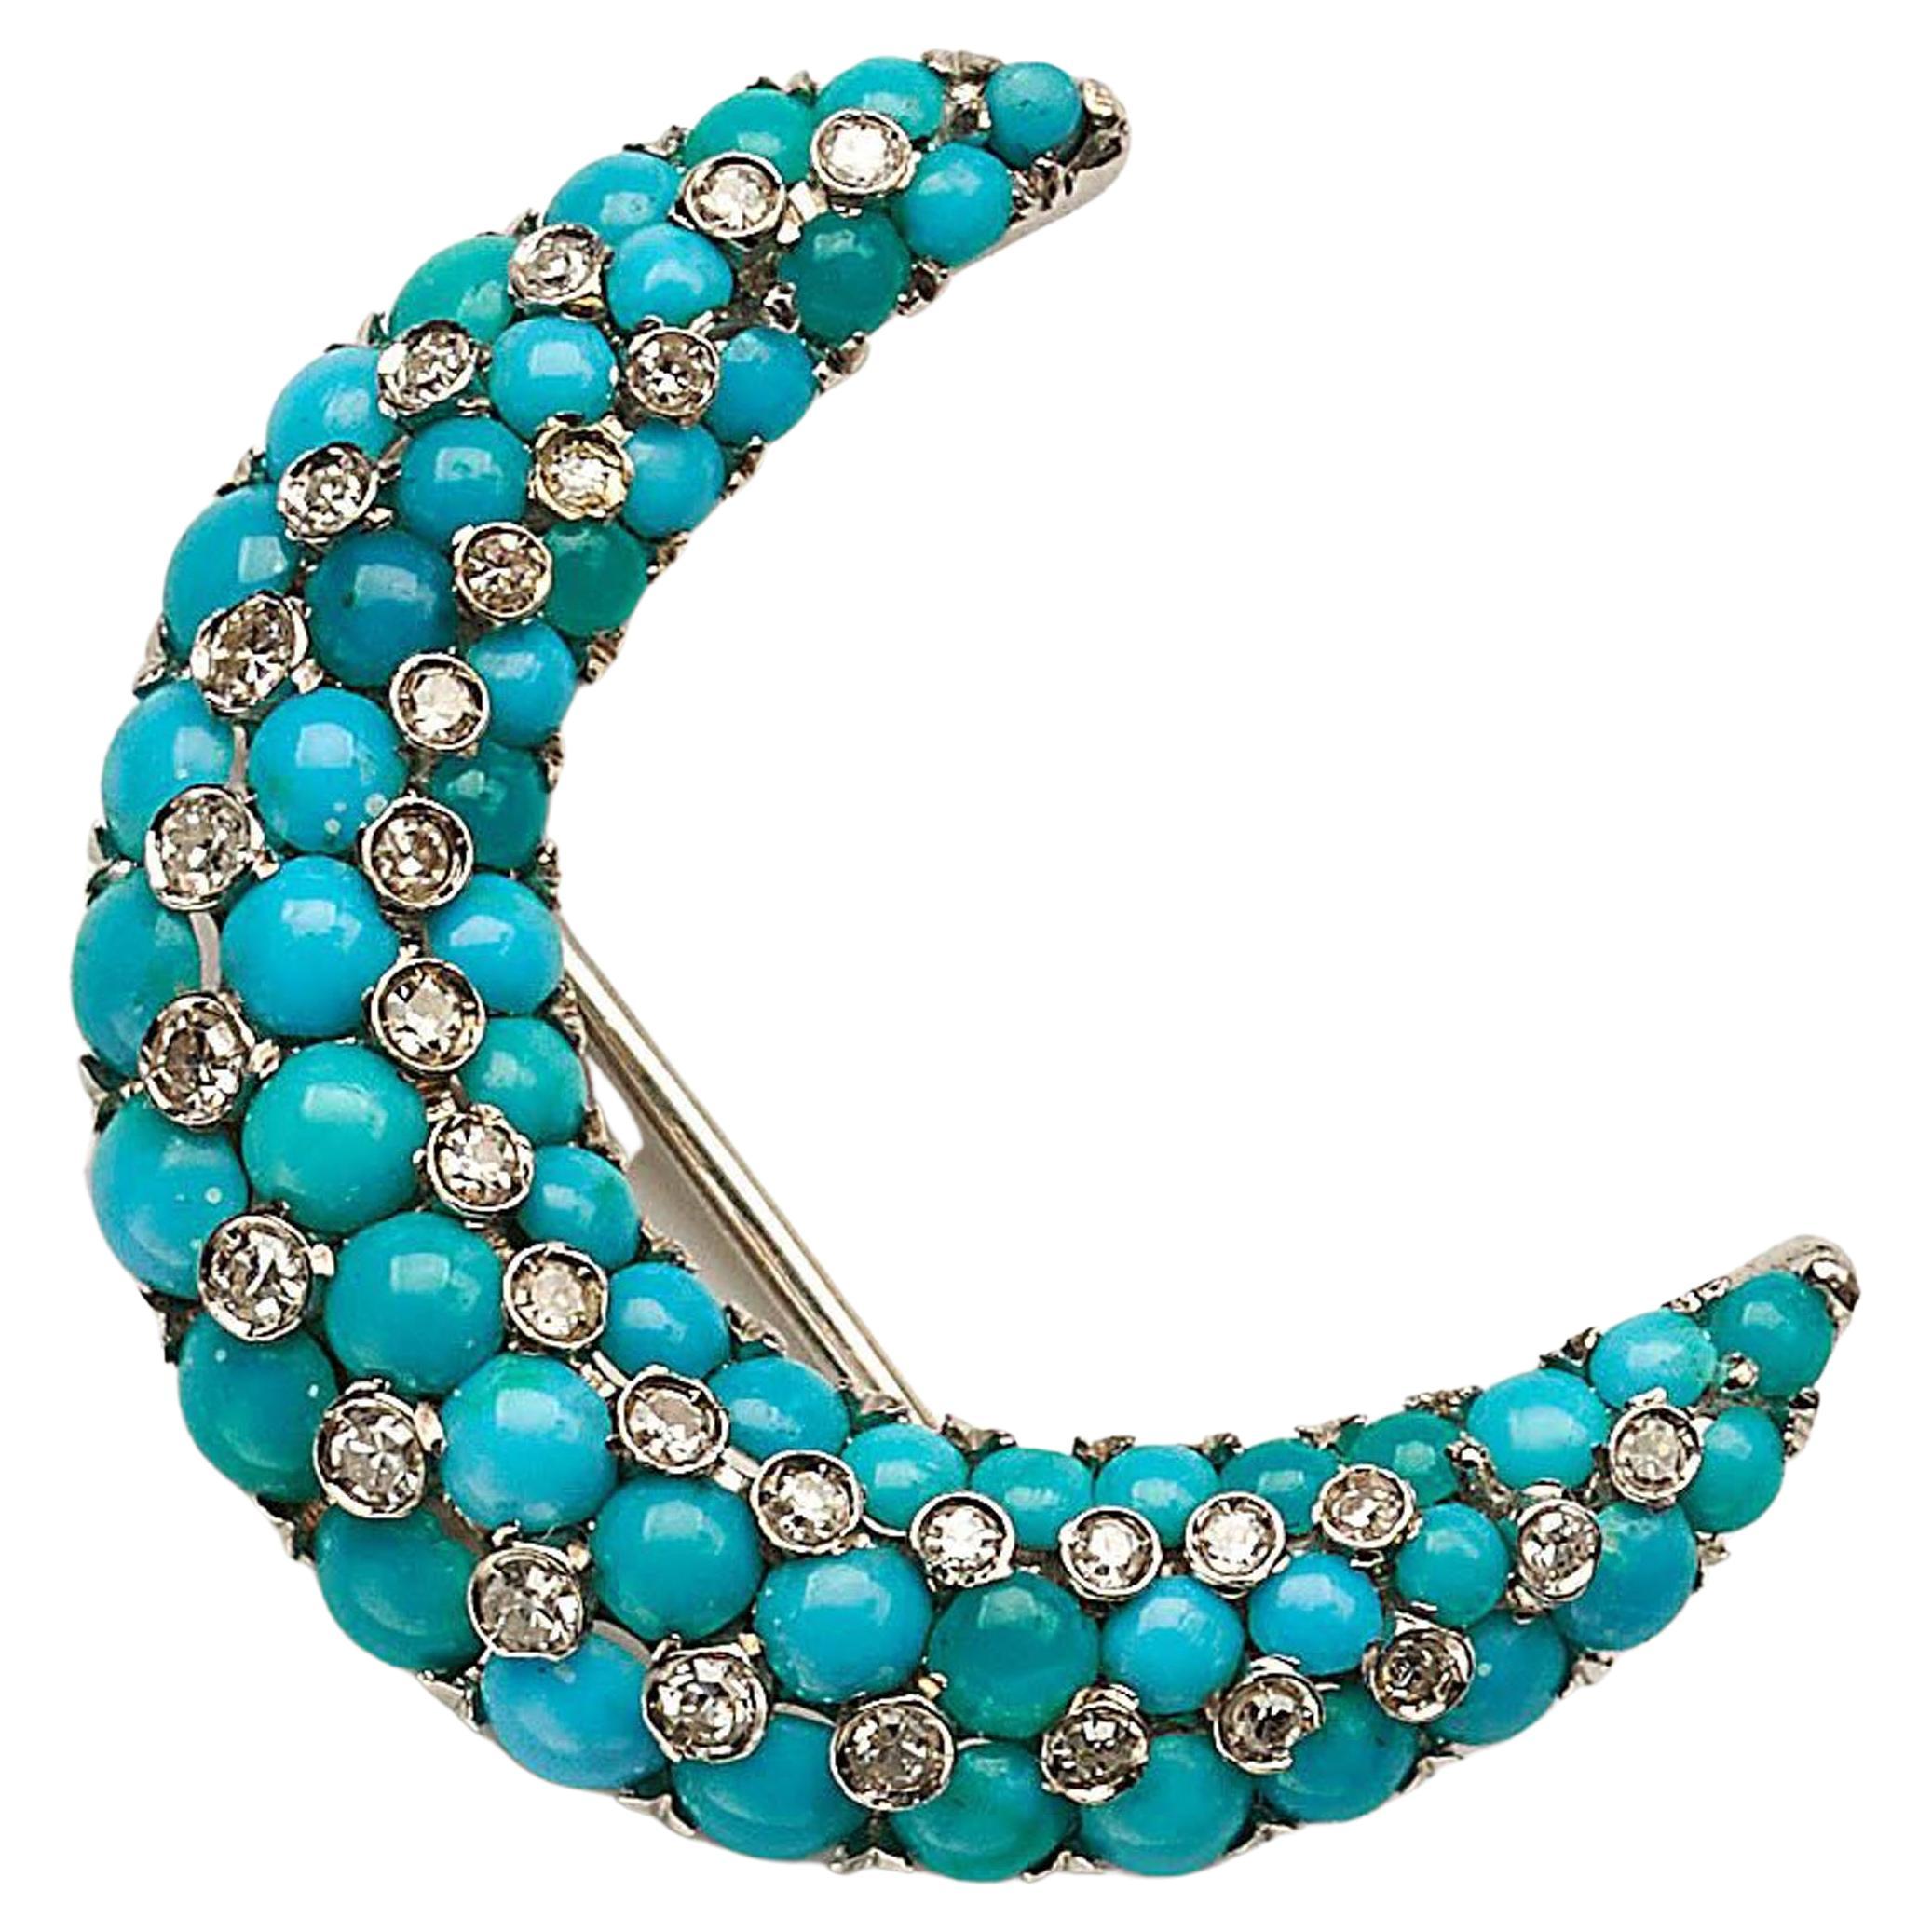 Tiffany & Co. Turquoise Diamond and White Gold Crescent Brooch, circa 1960